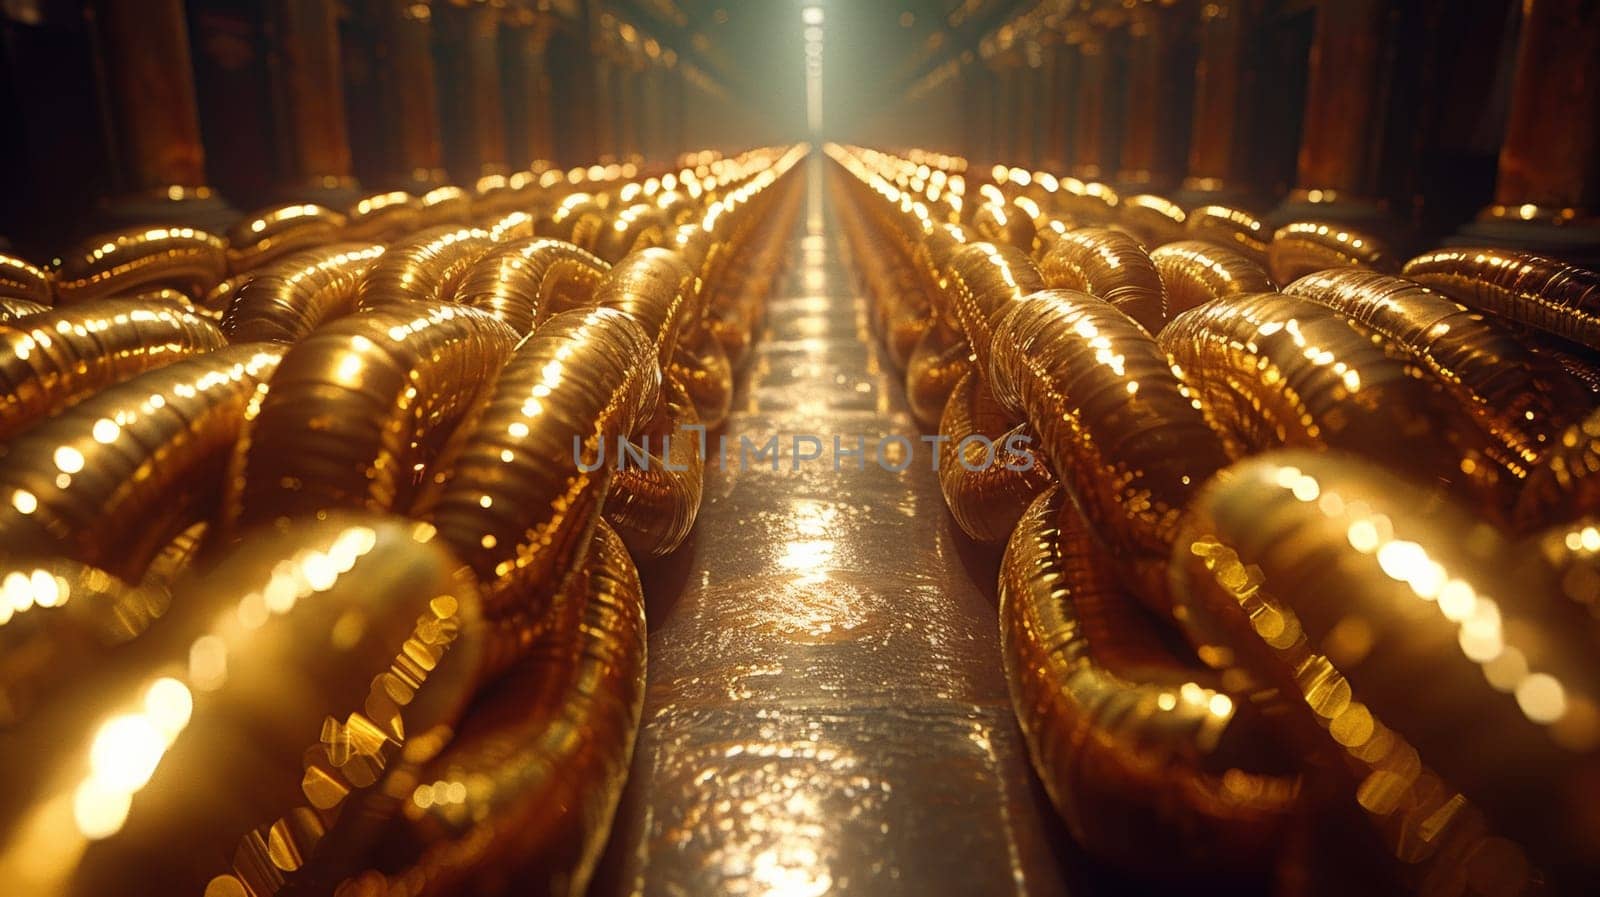 A row of golden chains are lined up in a warehouse